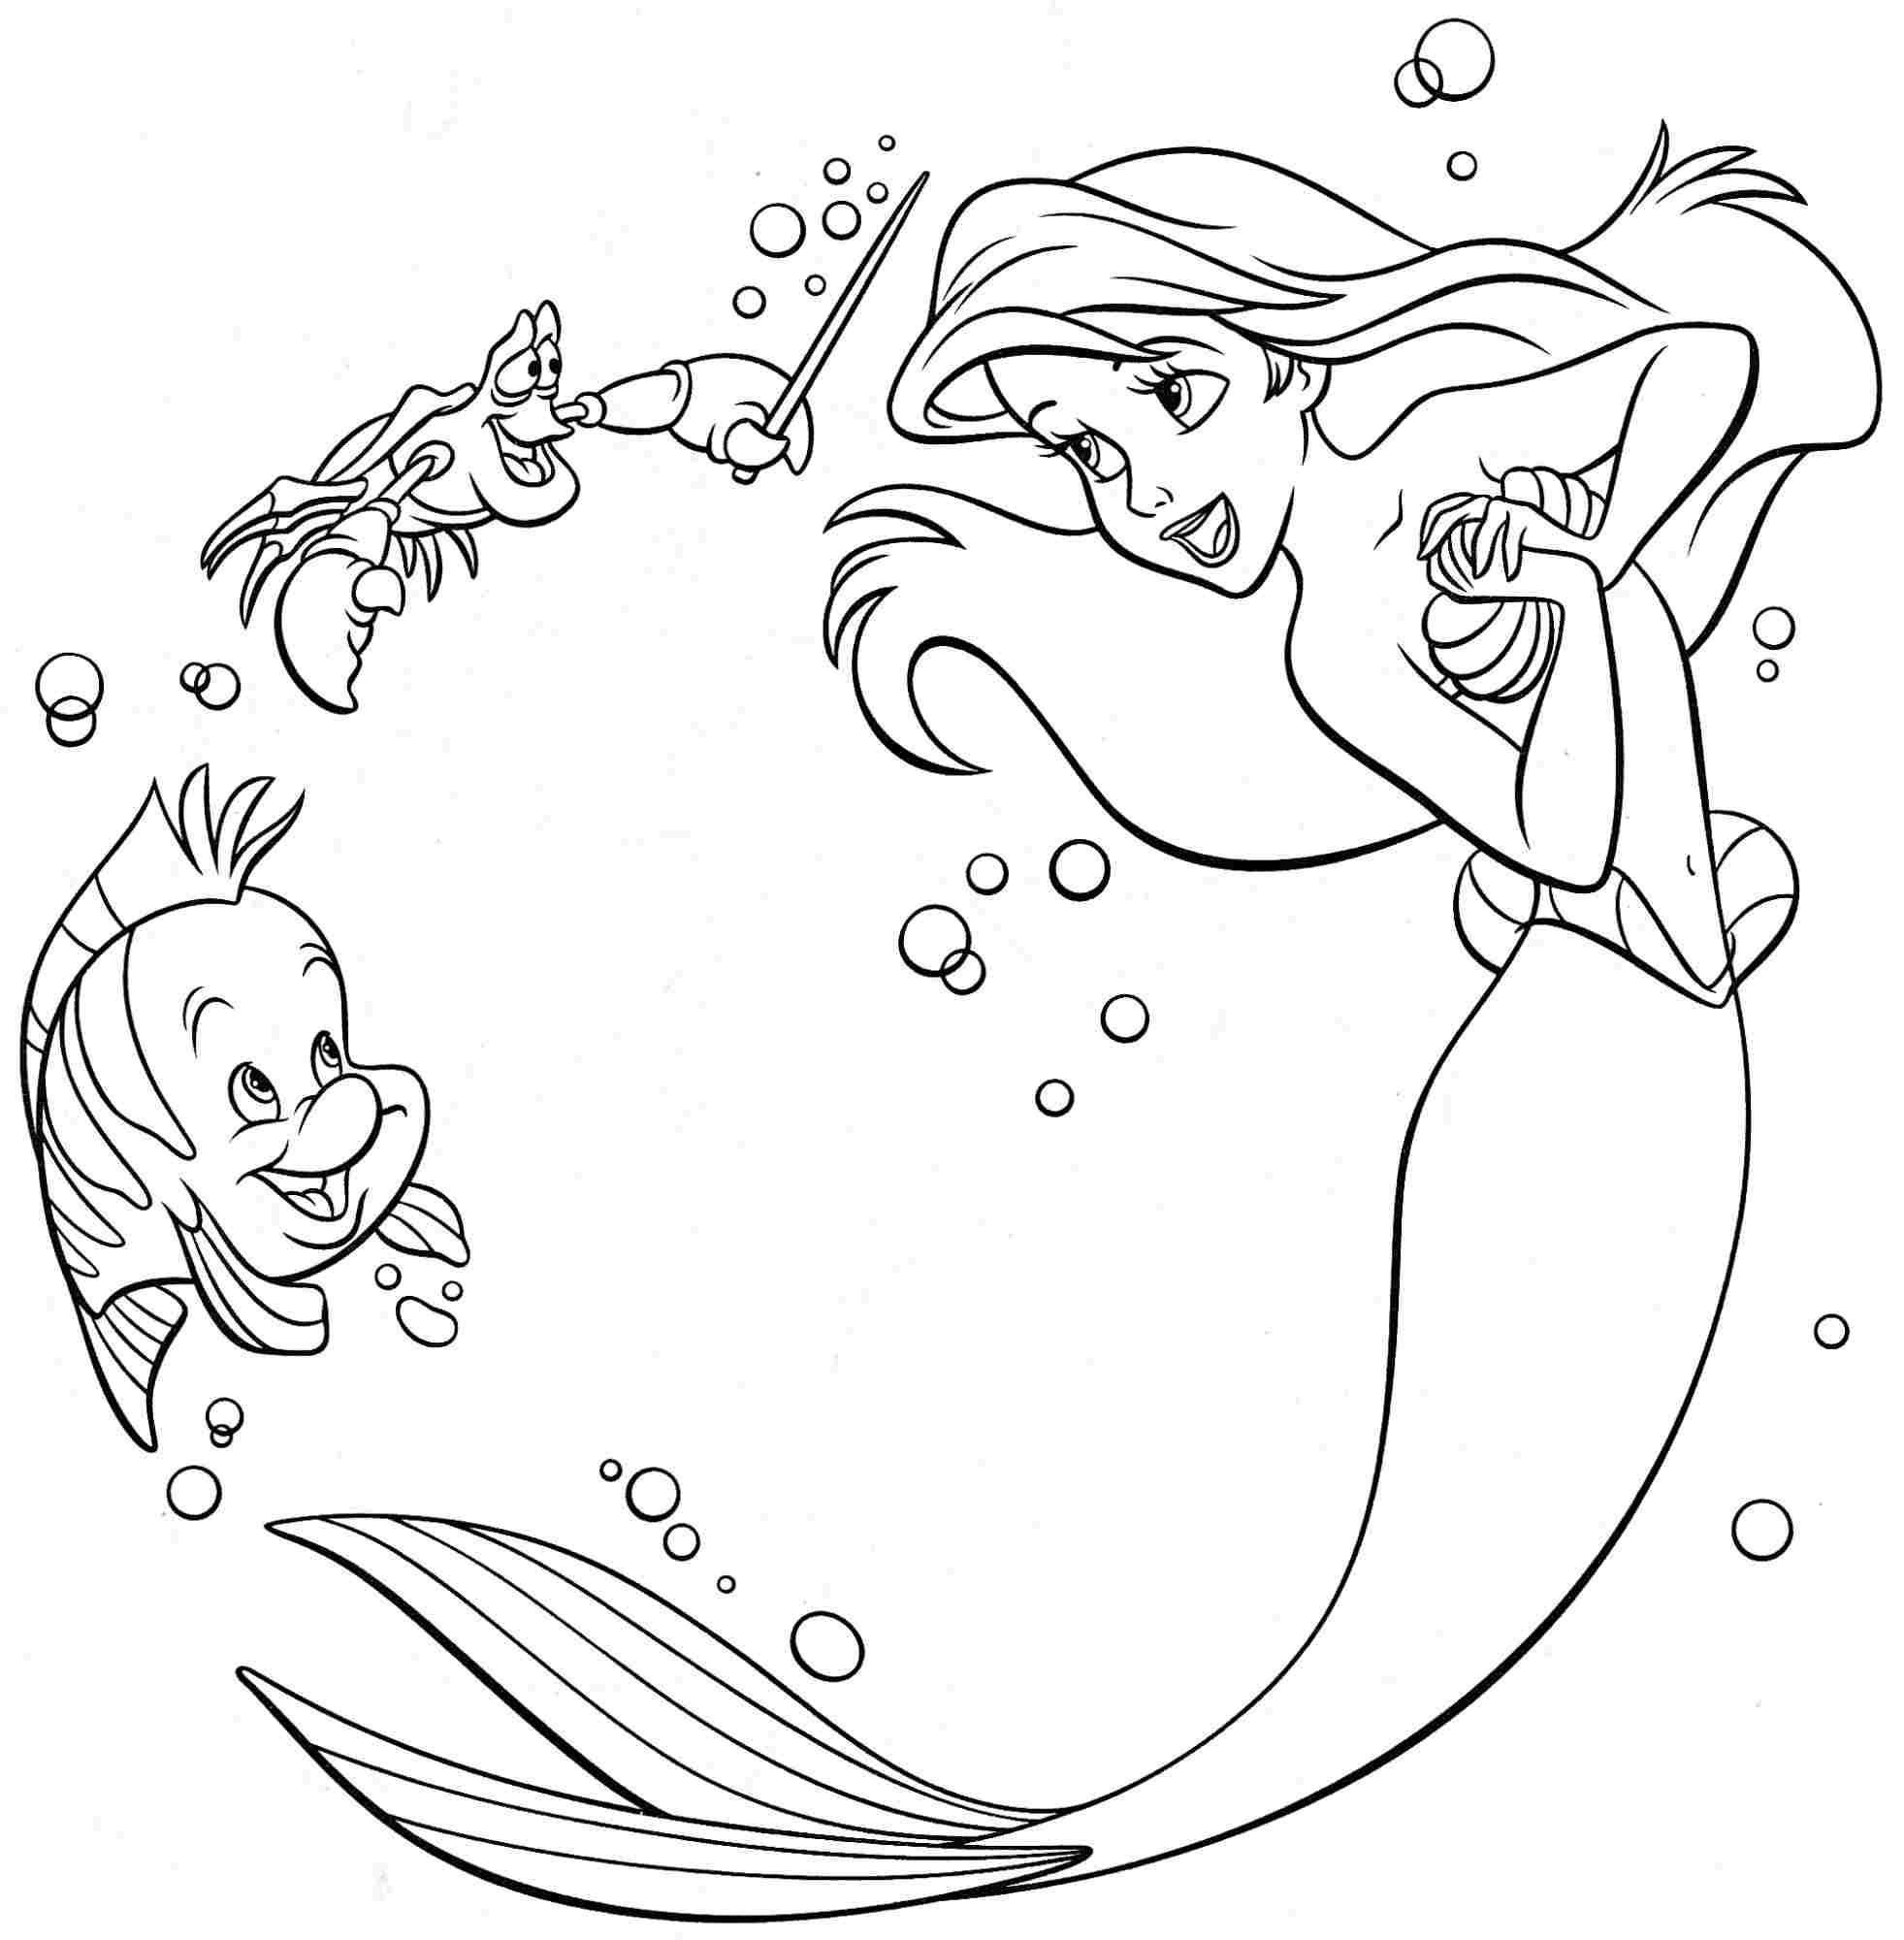 Disney Princesses Cartoon Coloring Pages - Coloring Home